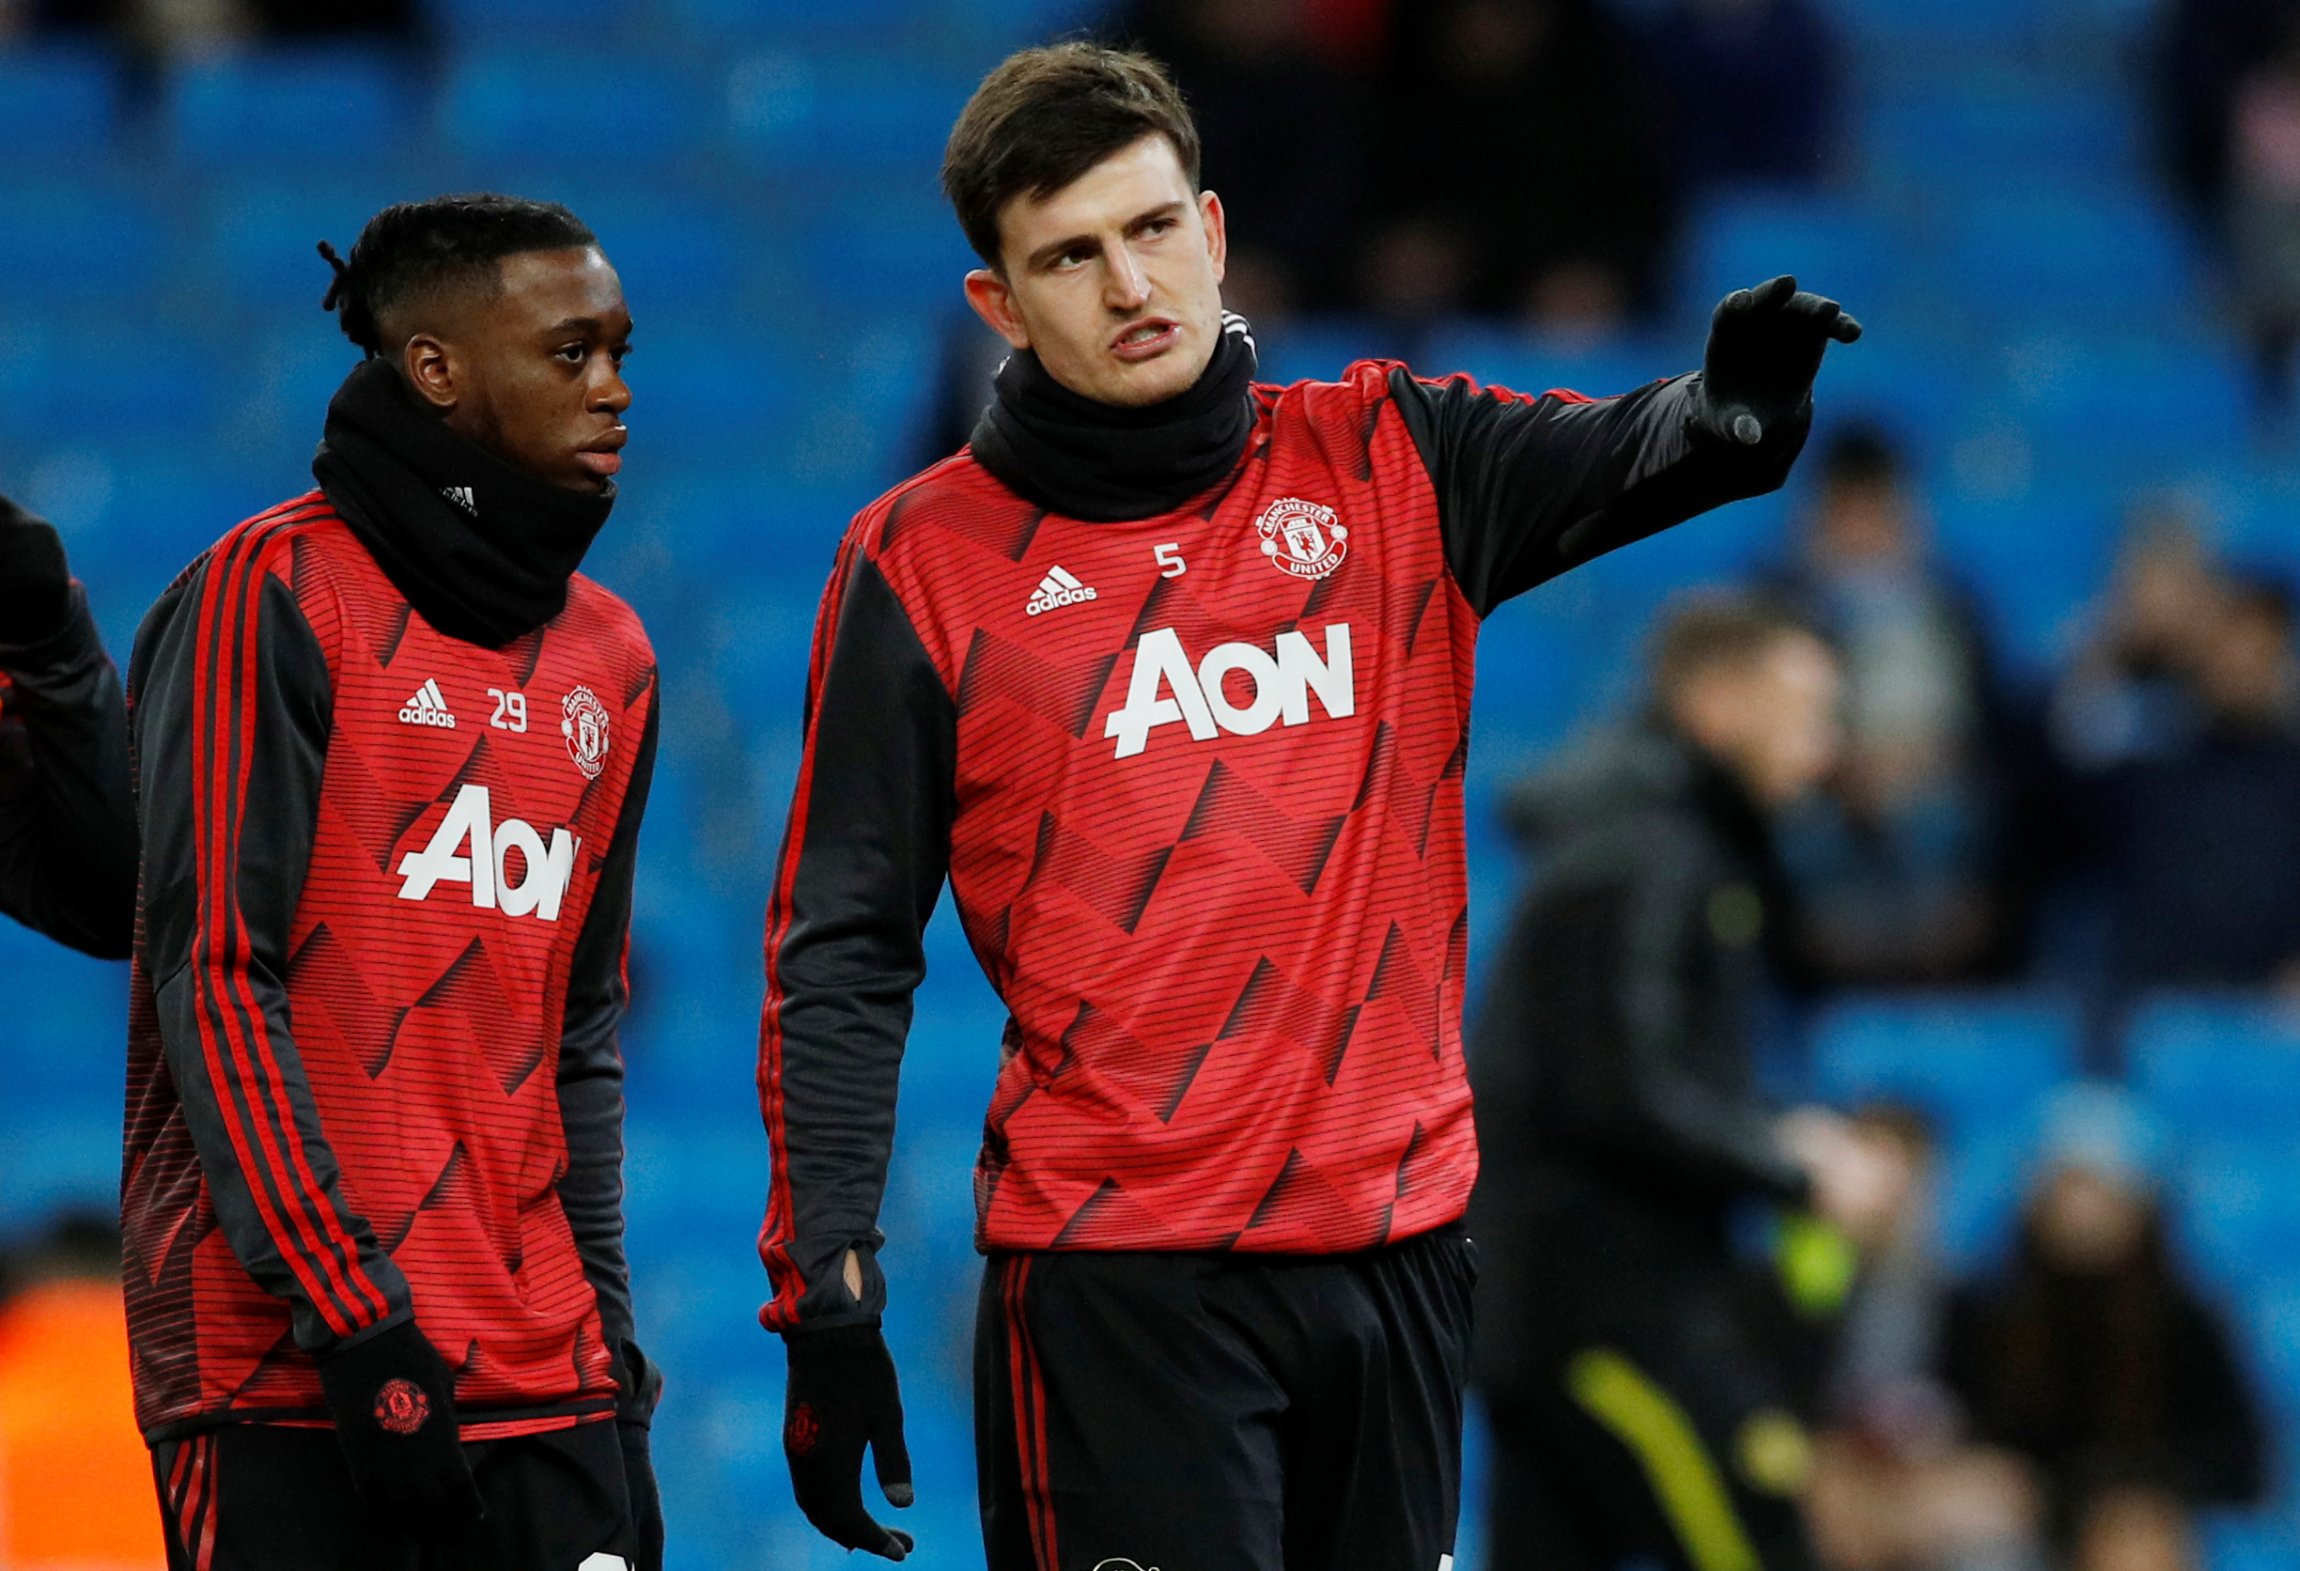 Transfer News: Manchester United could sell Harry Maguire and Aaron Wan-Bissaka in the summer .